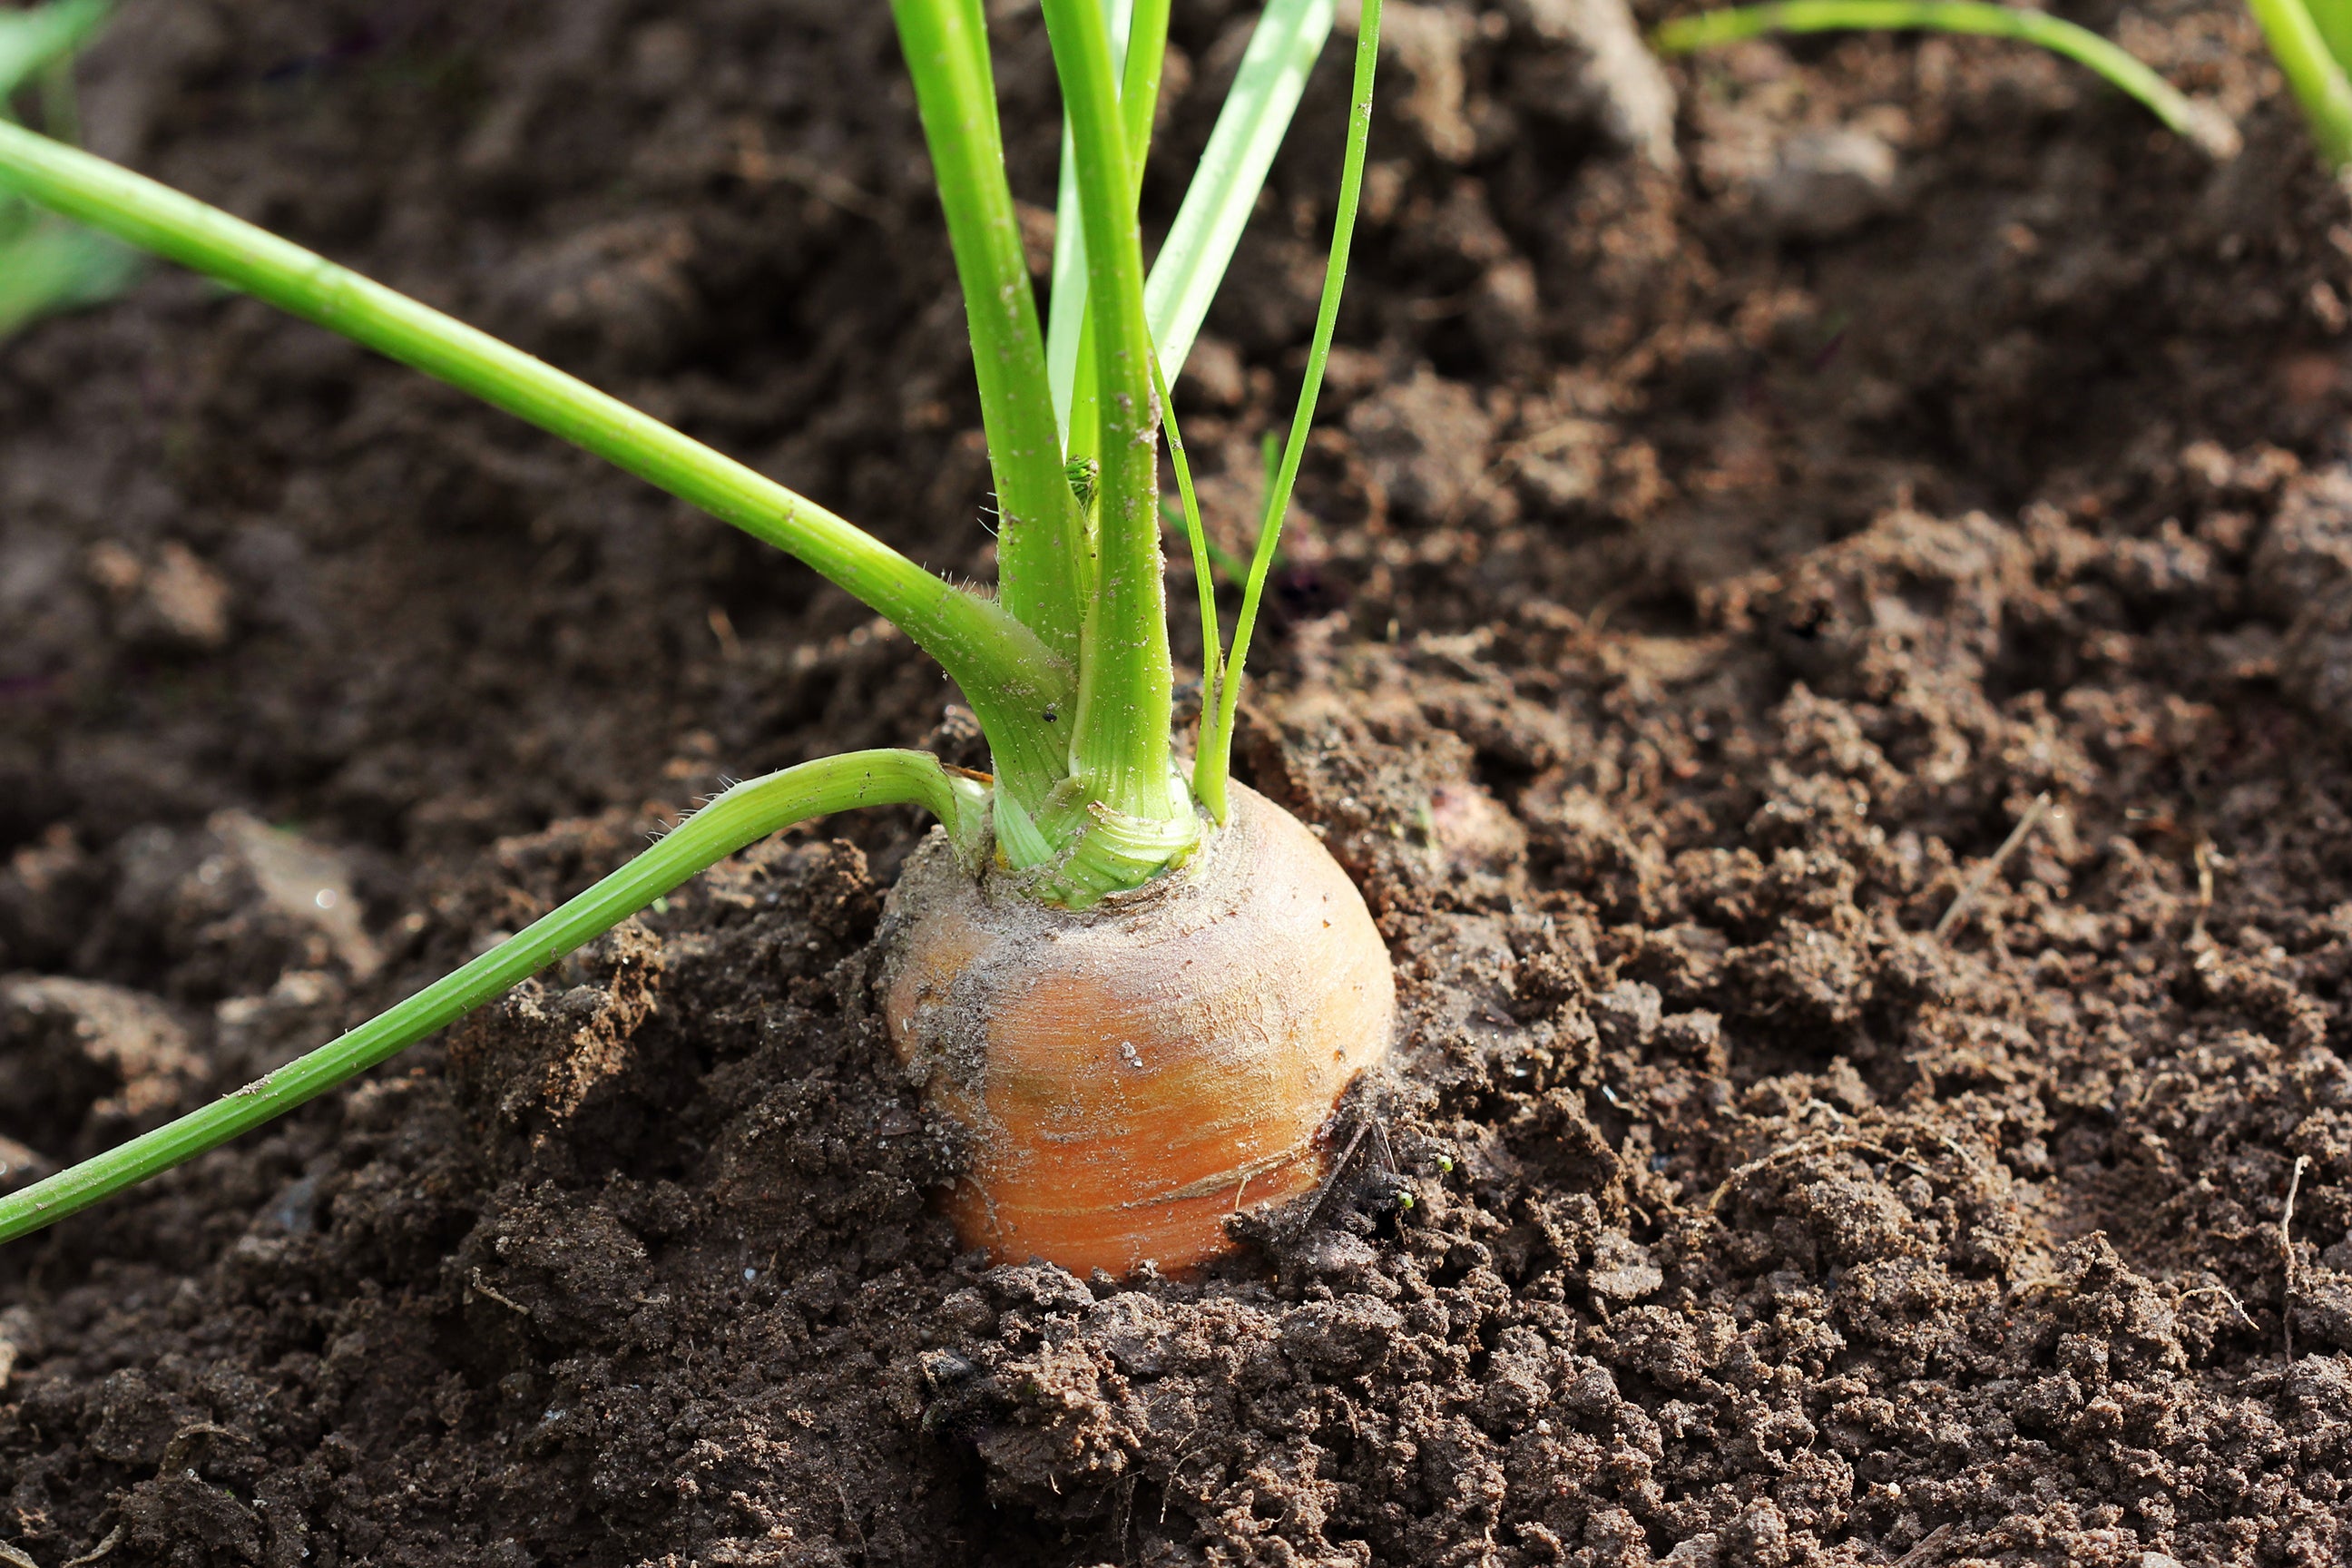 Orange carrot bulb in the ground used in Kekoa Foods organic baby food pouches.